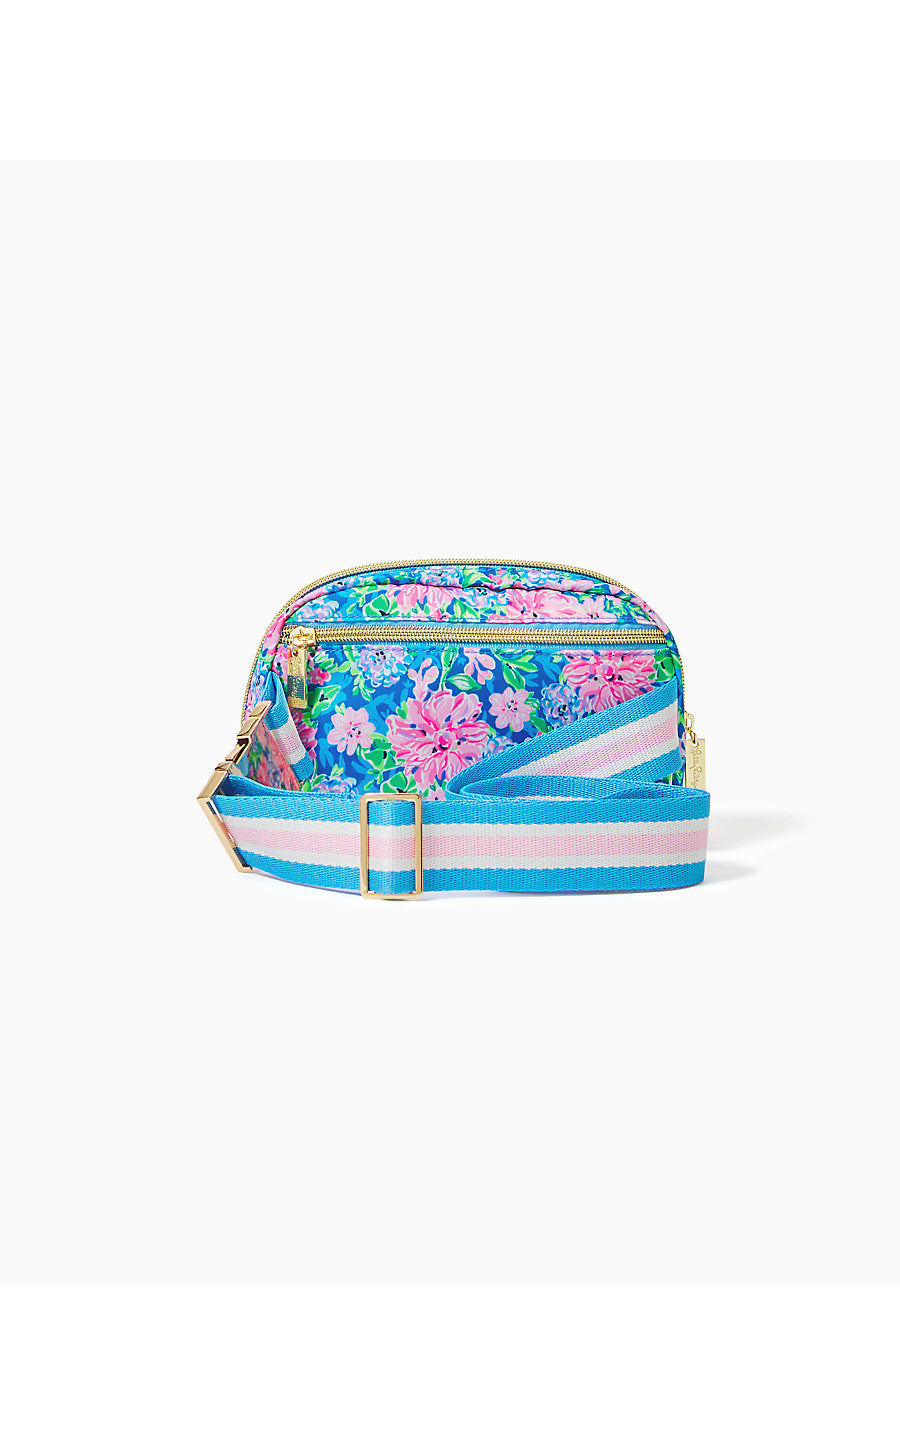 JEANIE BELT BAG, MULTI SPRING IN YOUR STEP ACCESSORIES SMALL